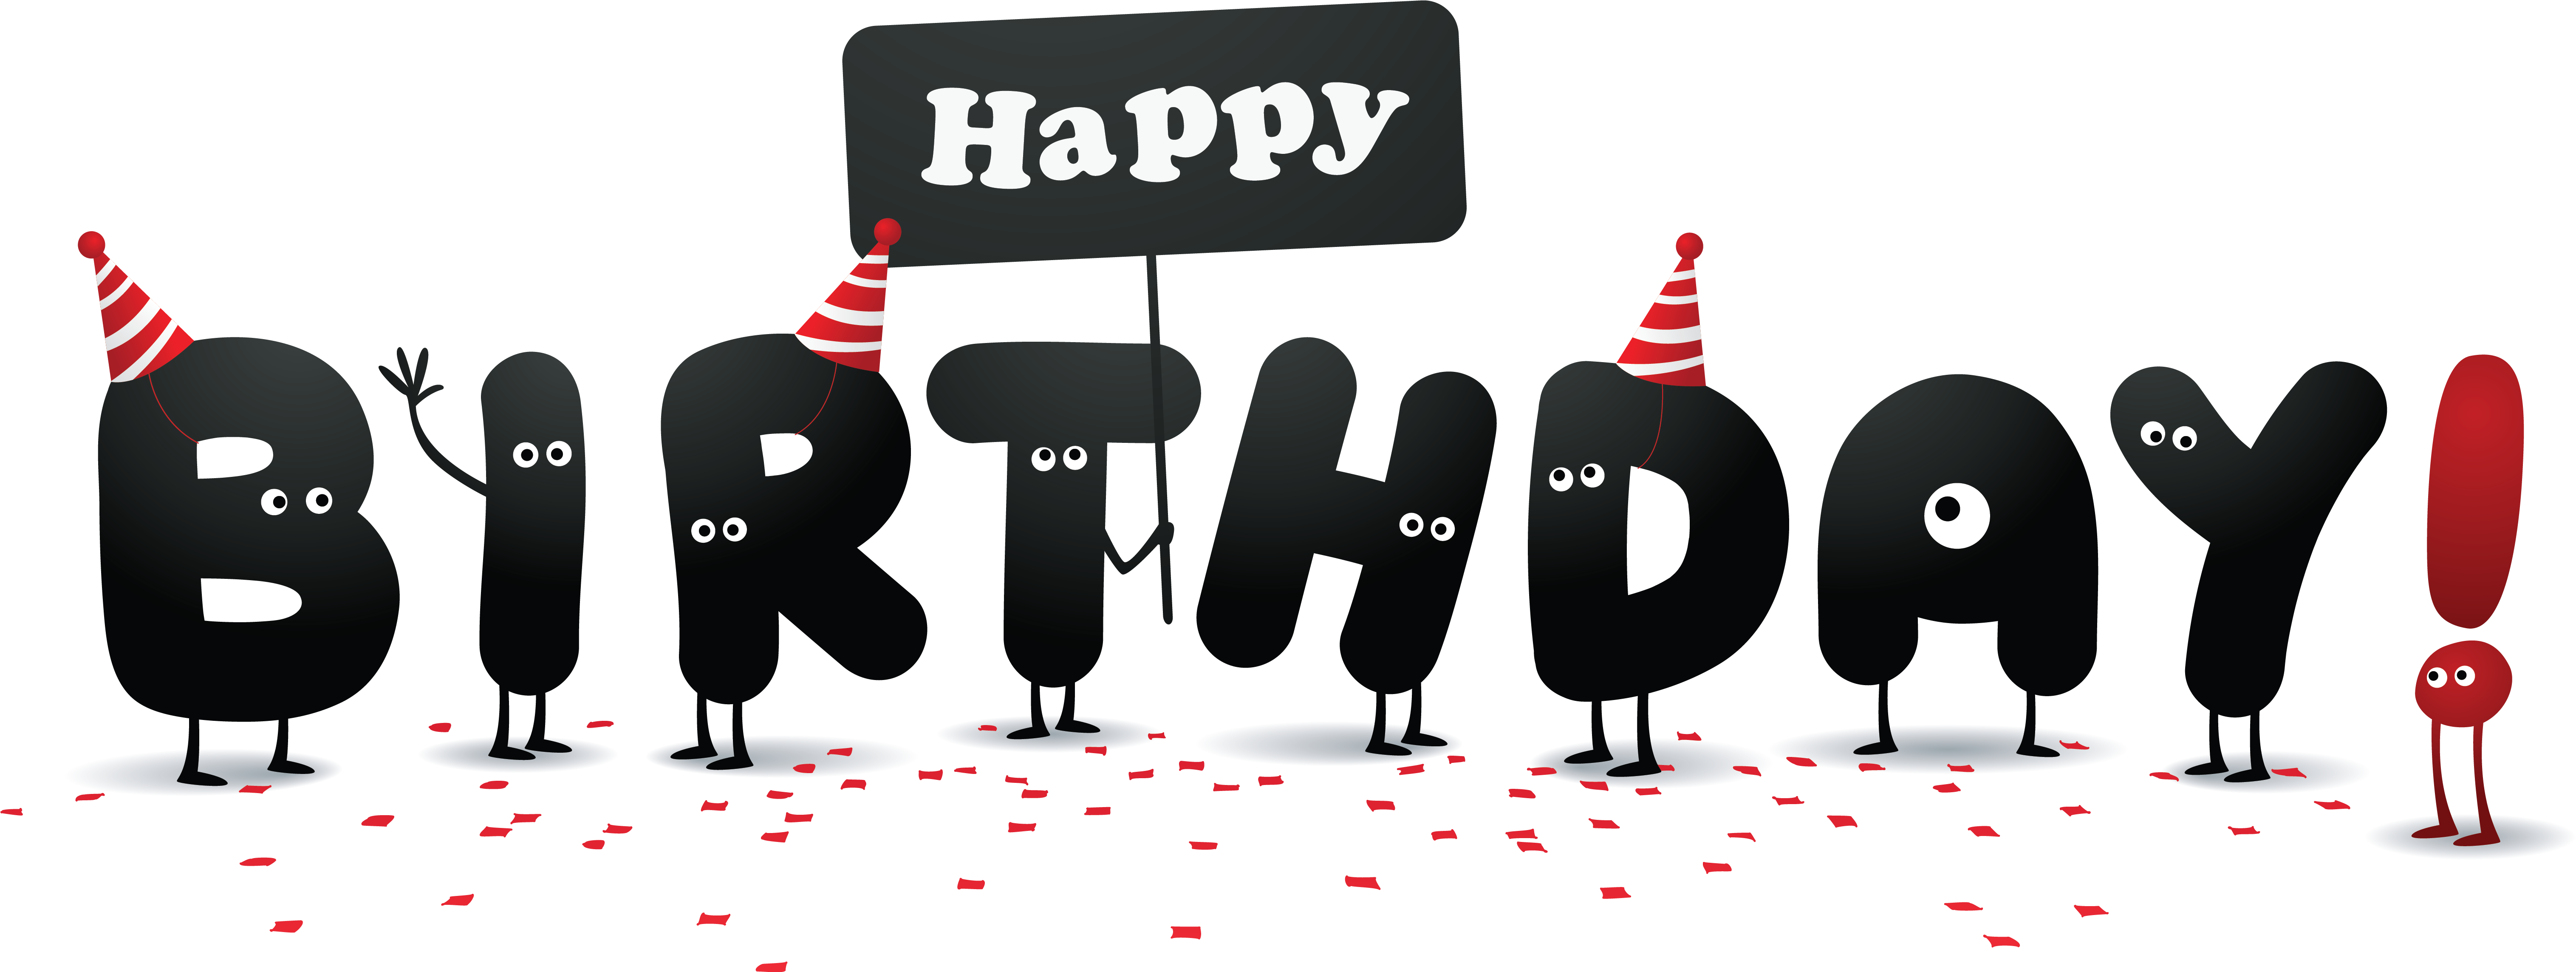 Funny Happy Birthday Clipart Image - Happy New Year 2012 Wishes (6296x2592)